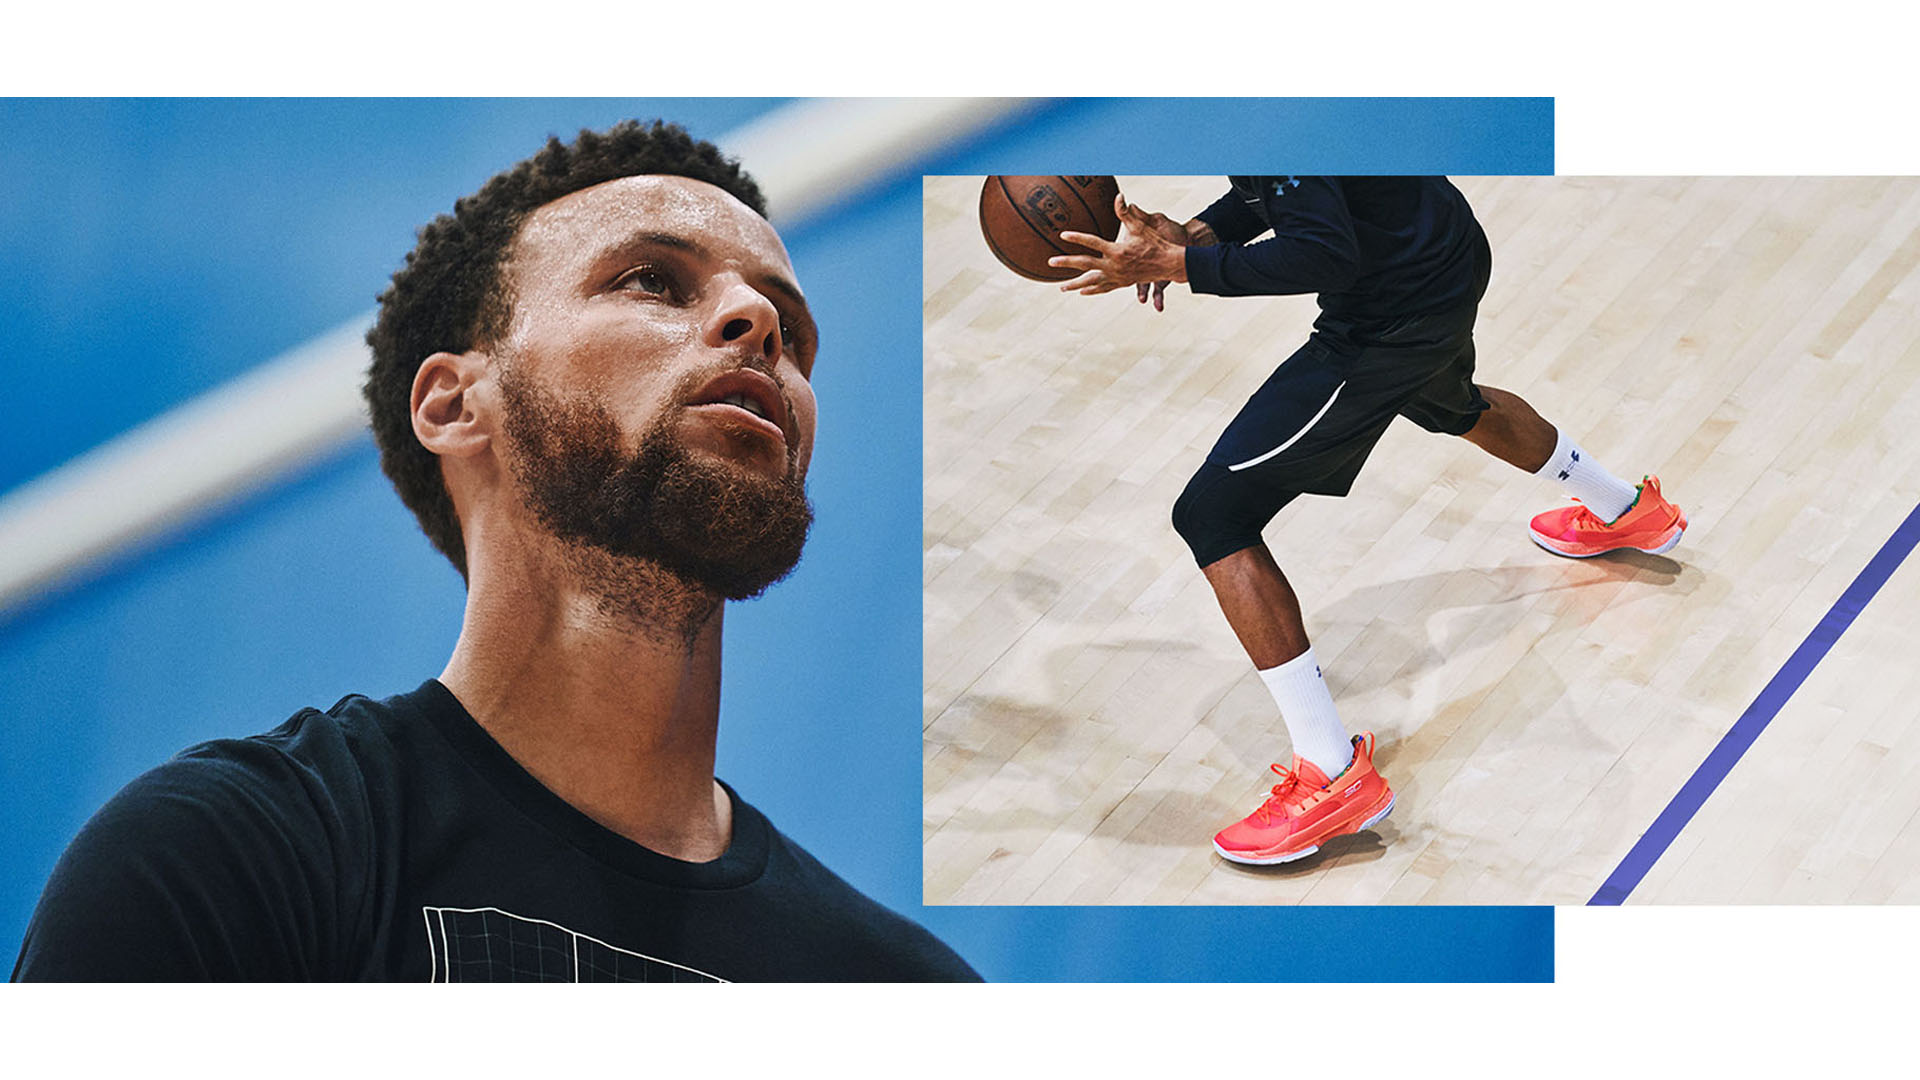 UA Curry 7 x Sour Patch Kids」が11月30日(土)登場！ ｜ FLY